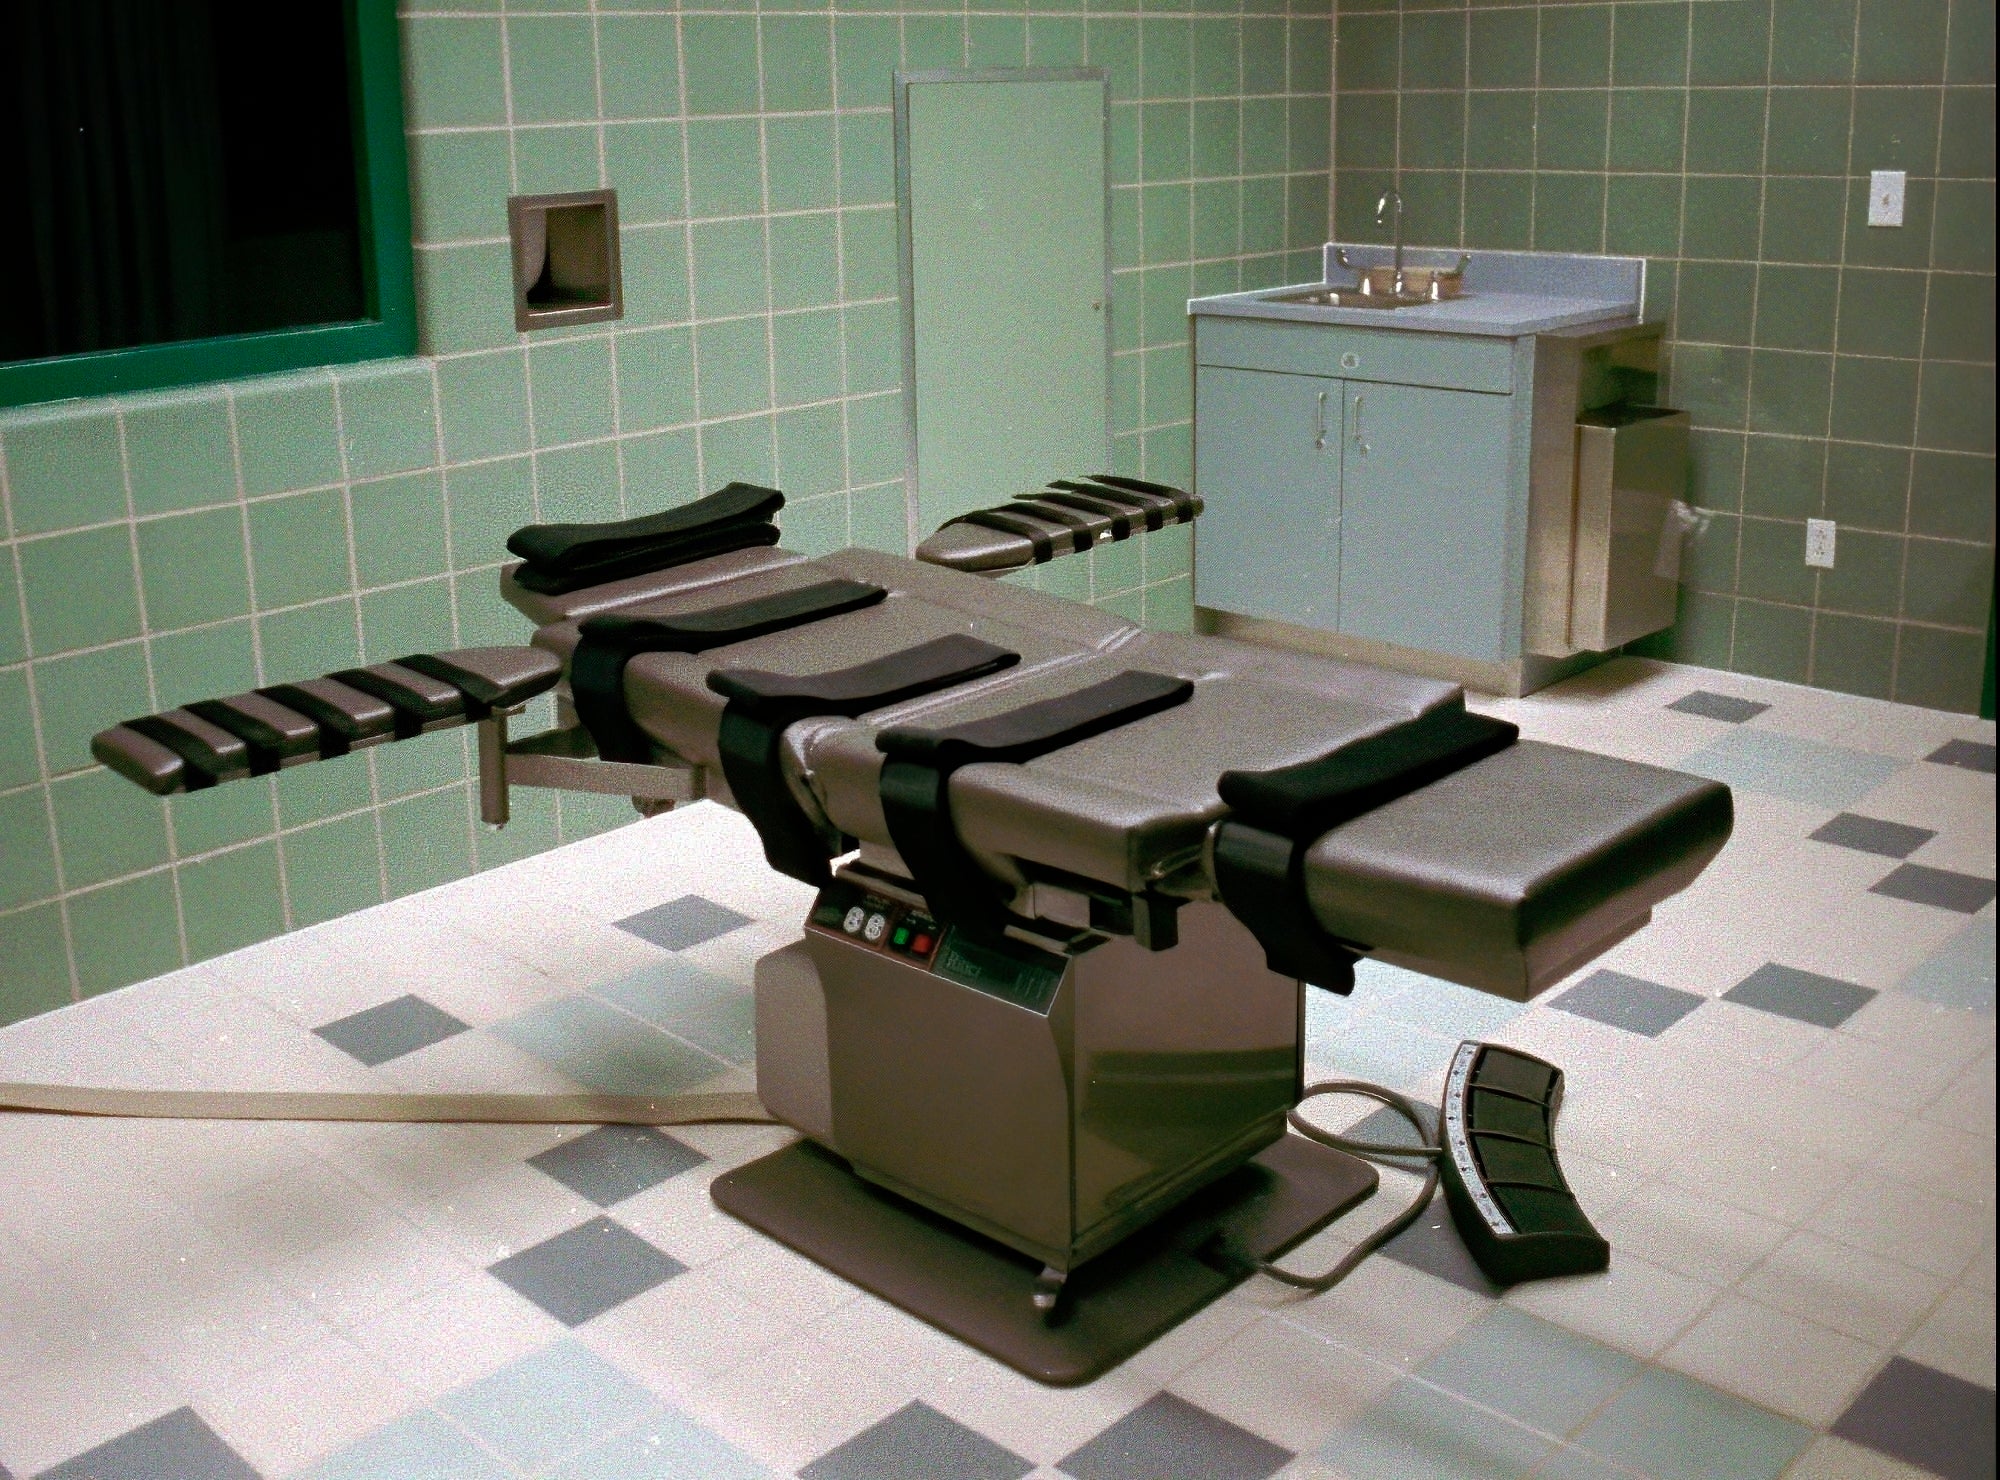 US Federal Executions Congress